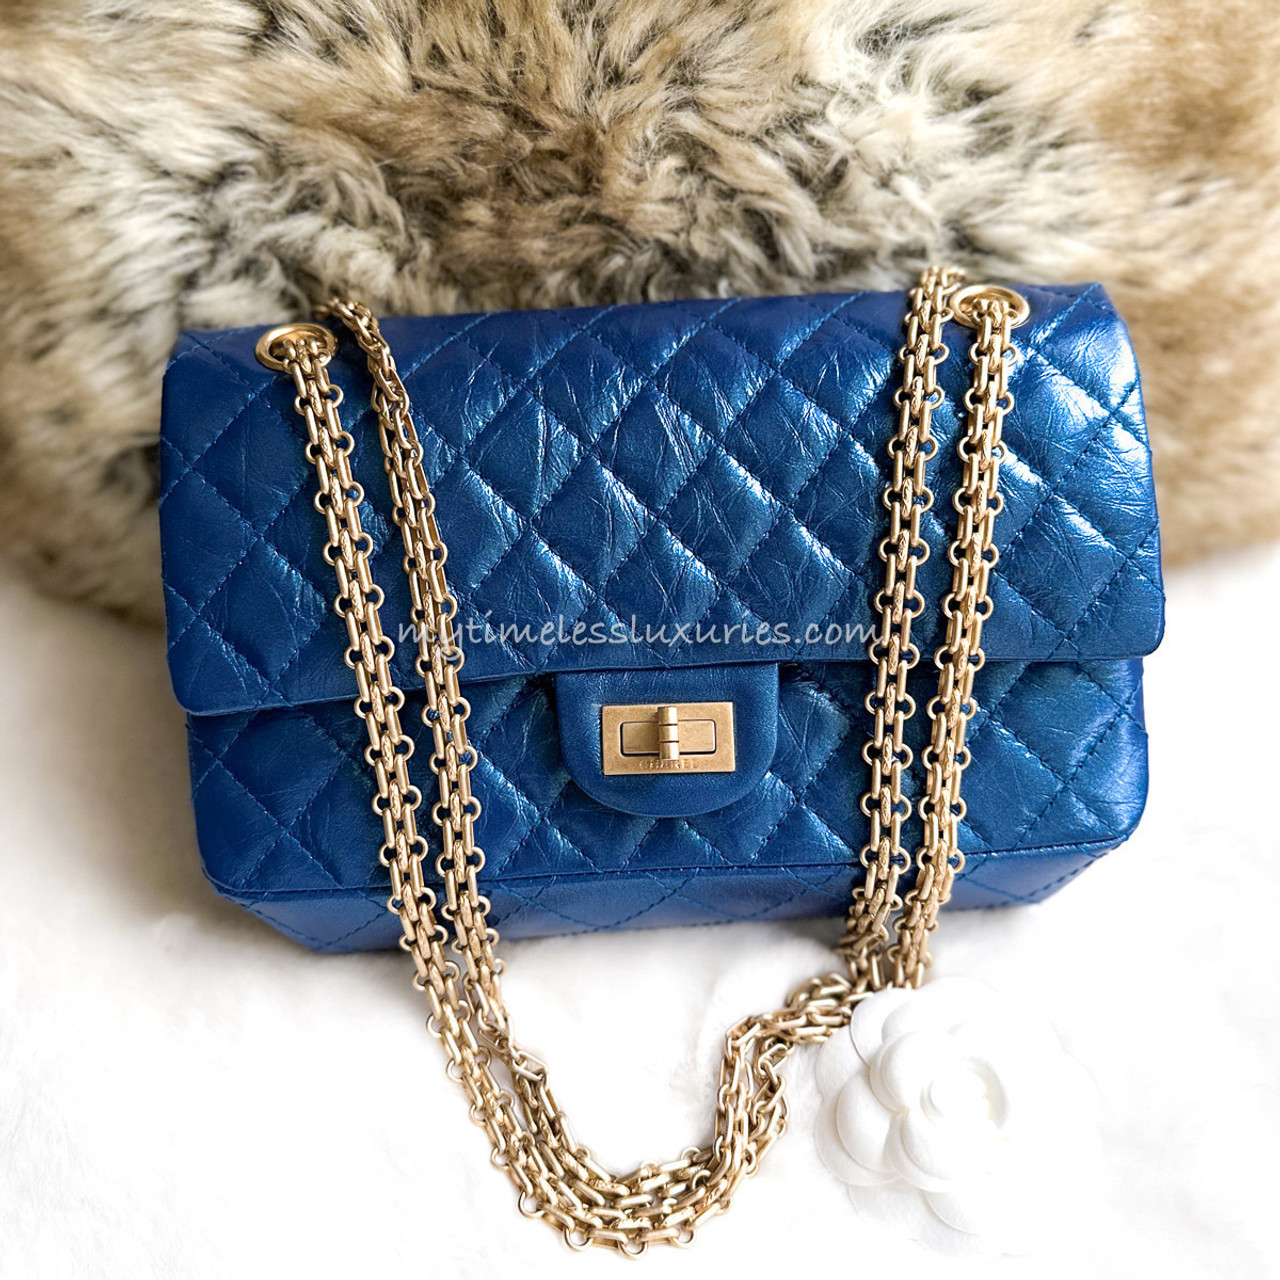 CHANEL 19A Iridescent Blue 2.55 Reissue 225 GHW - Timeless Luxuries